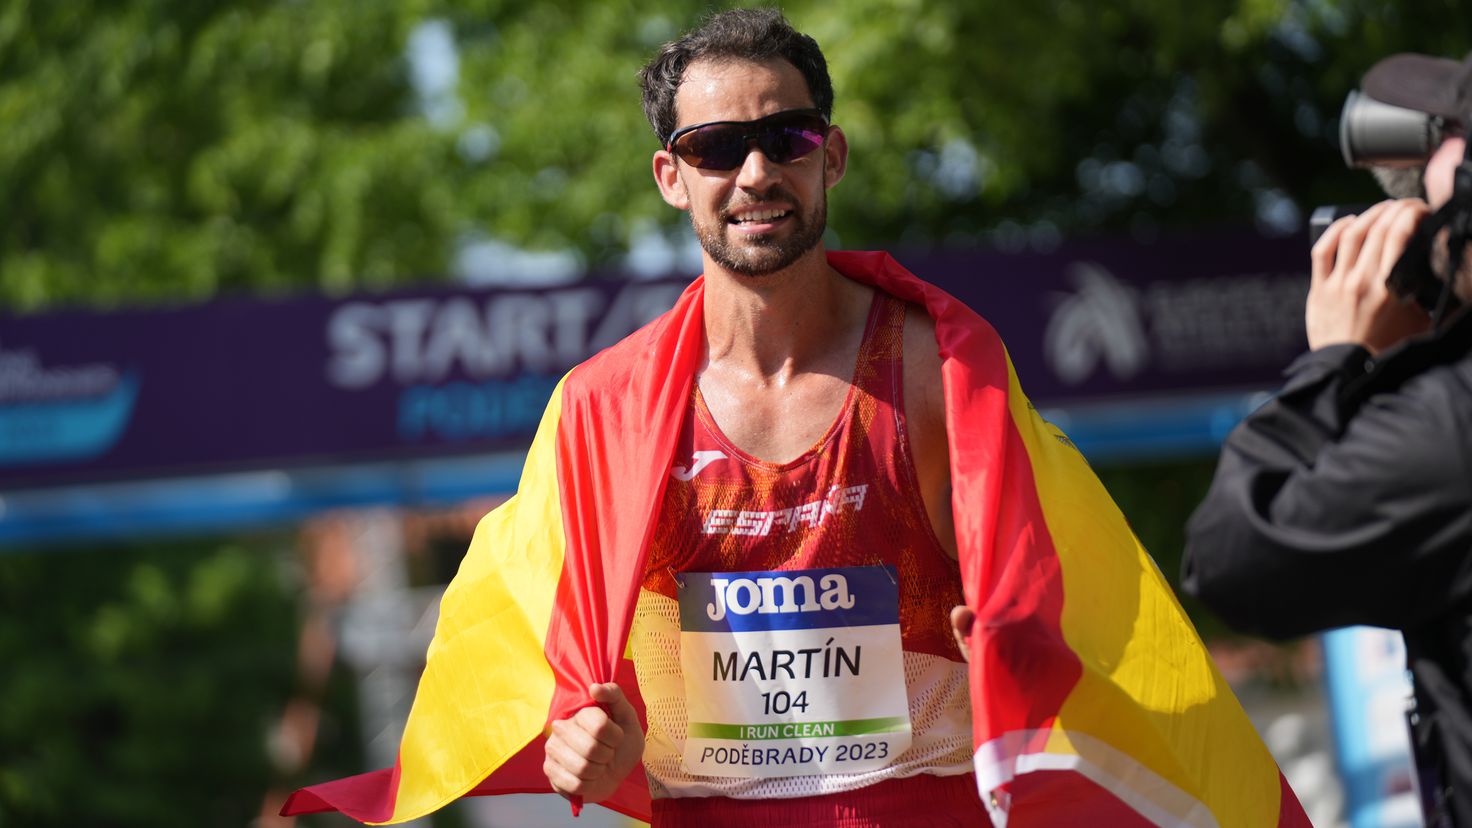 Spain has the best march in Europe: golds and world record
